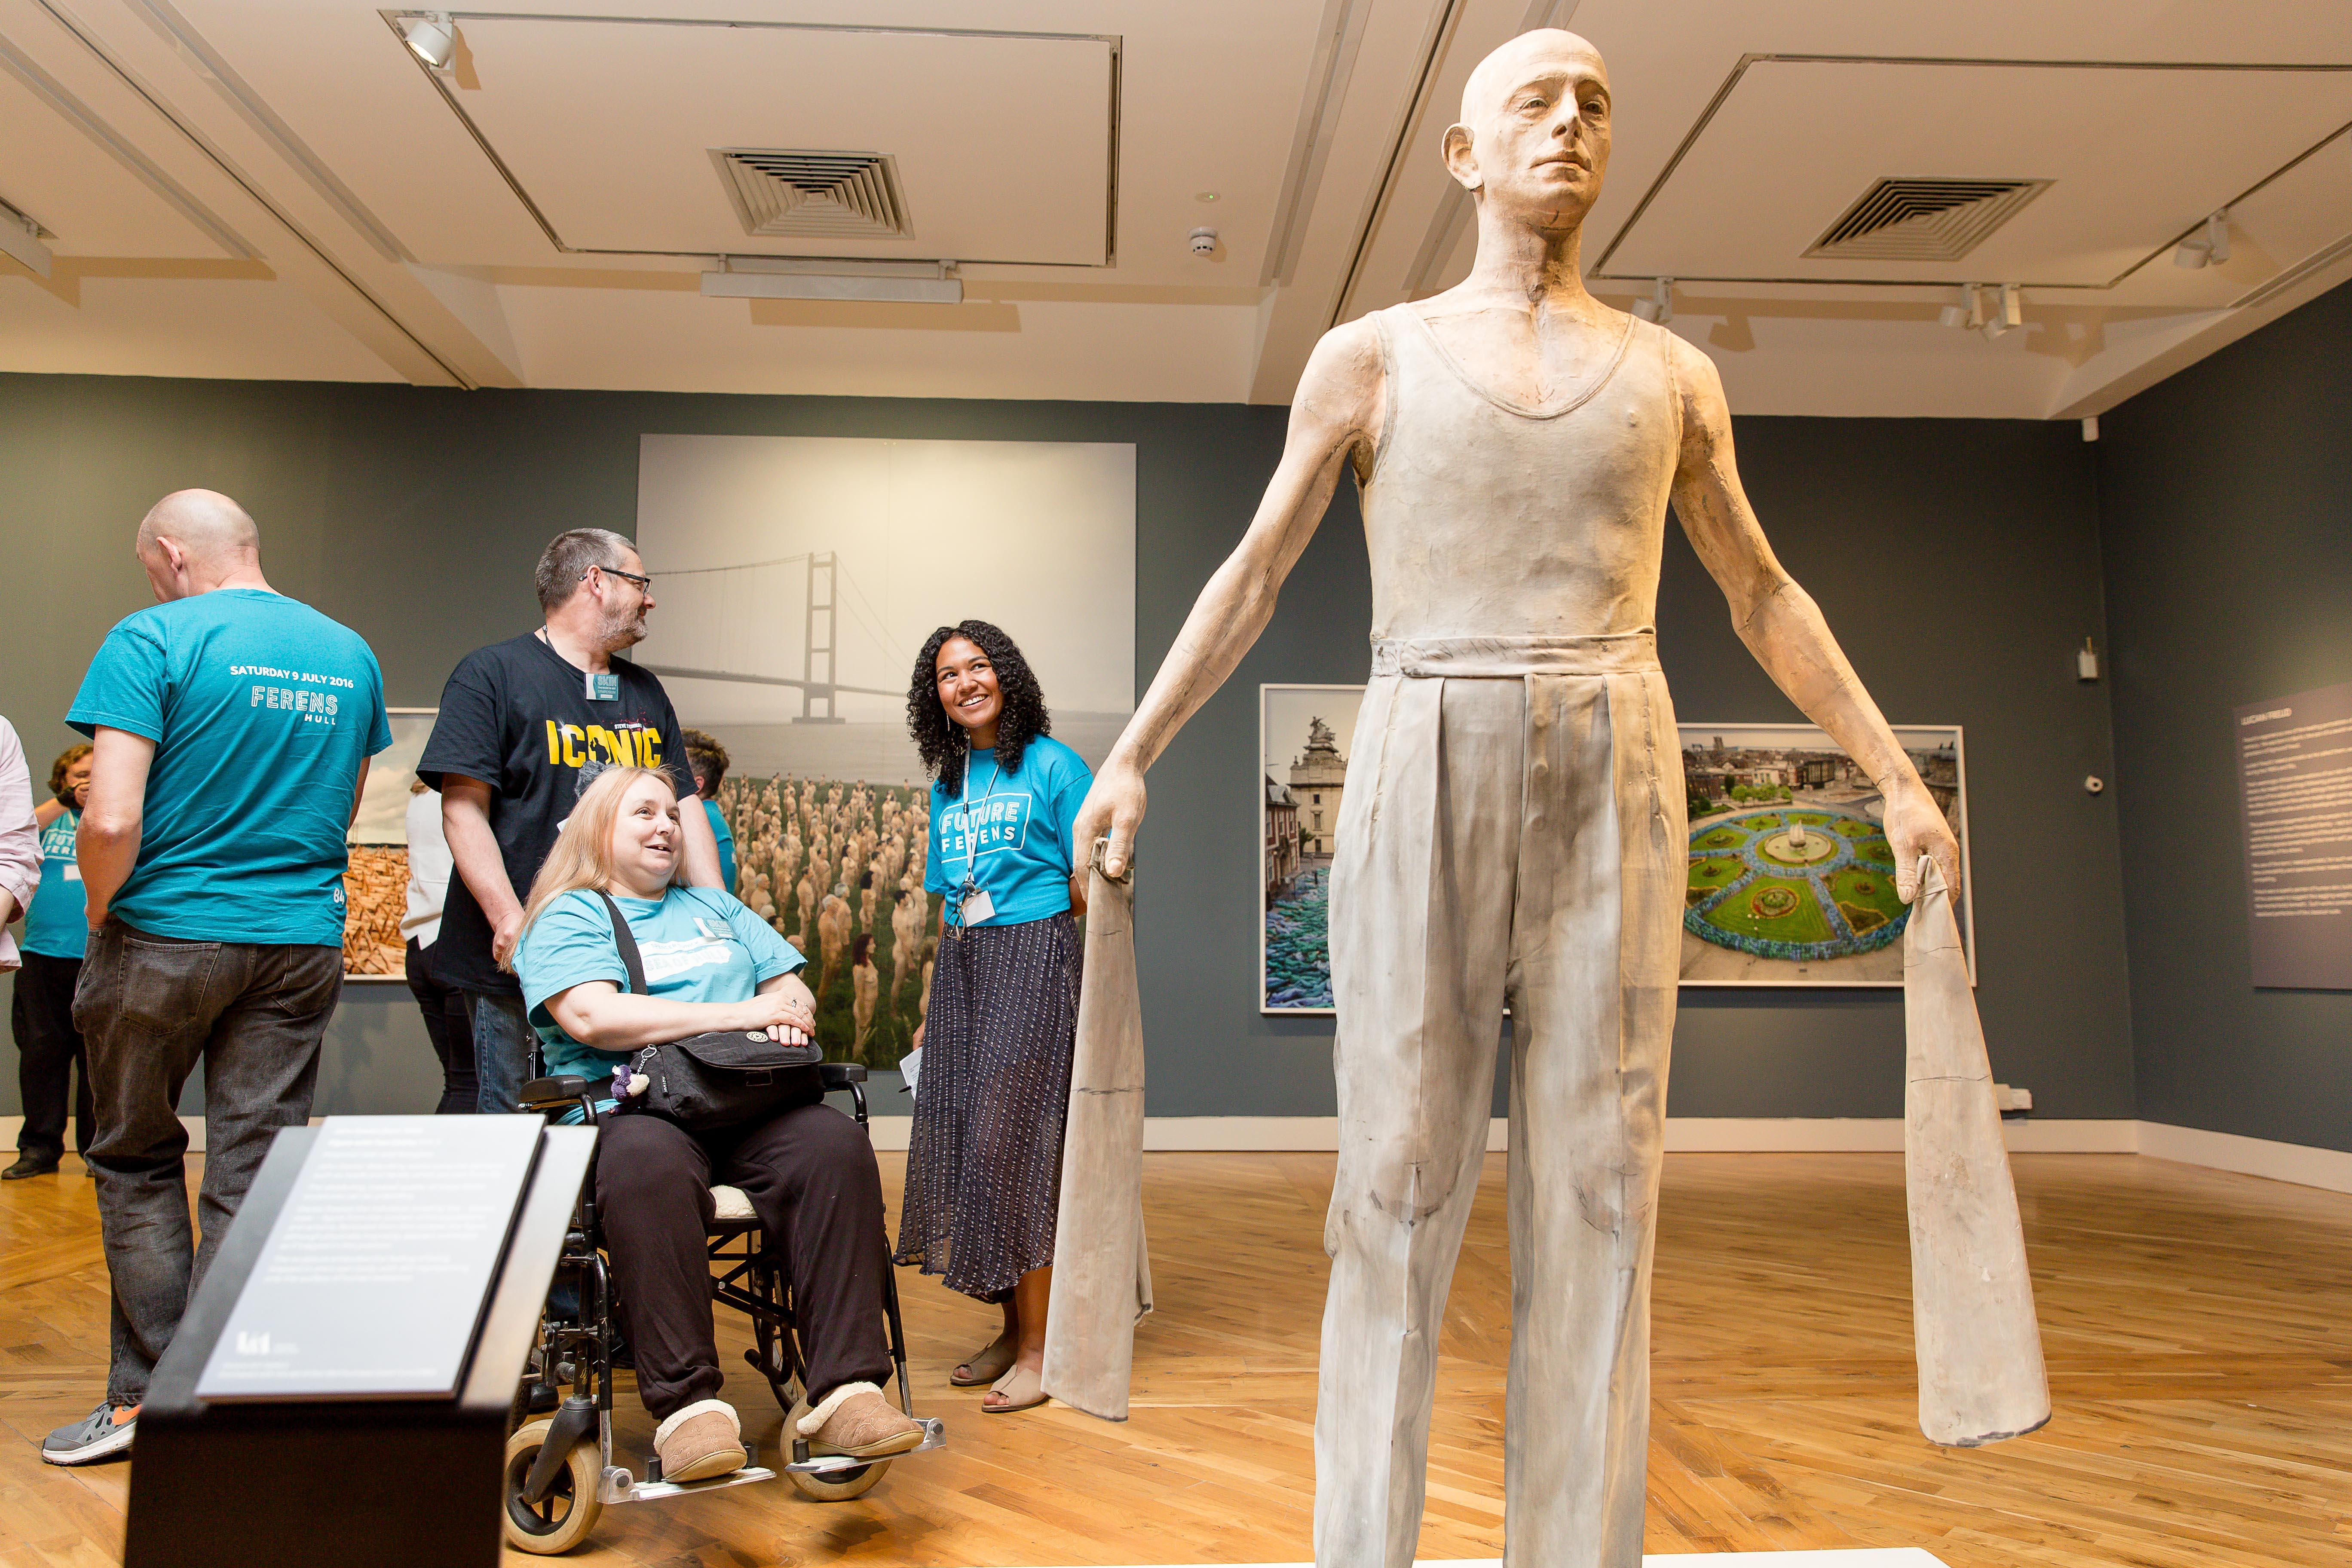 Four people looking at a sculpture of a man.